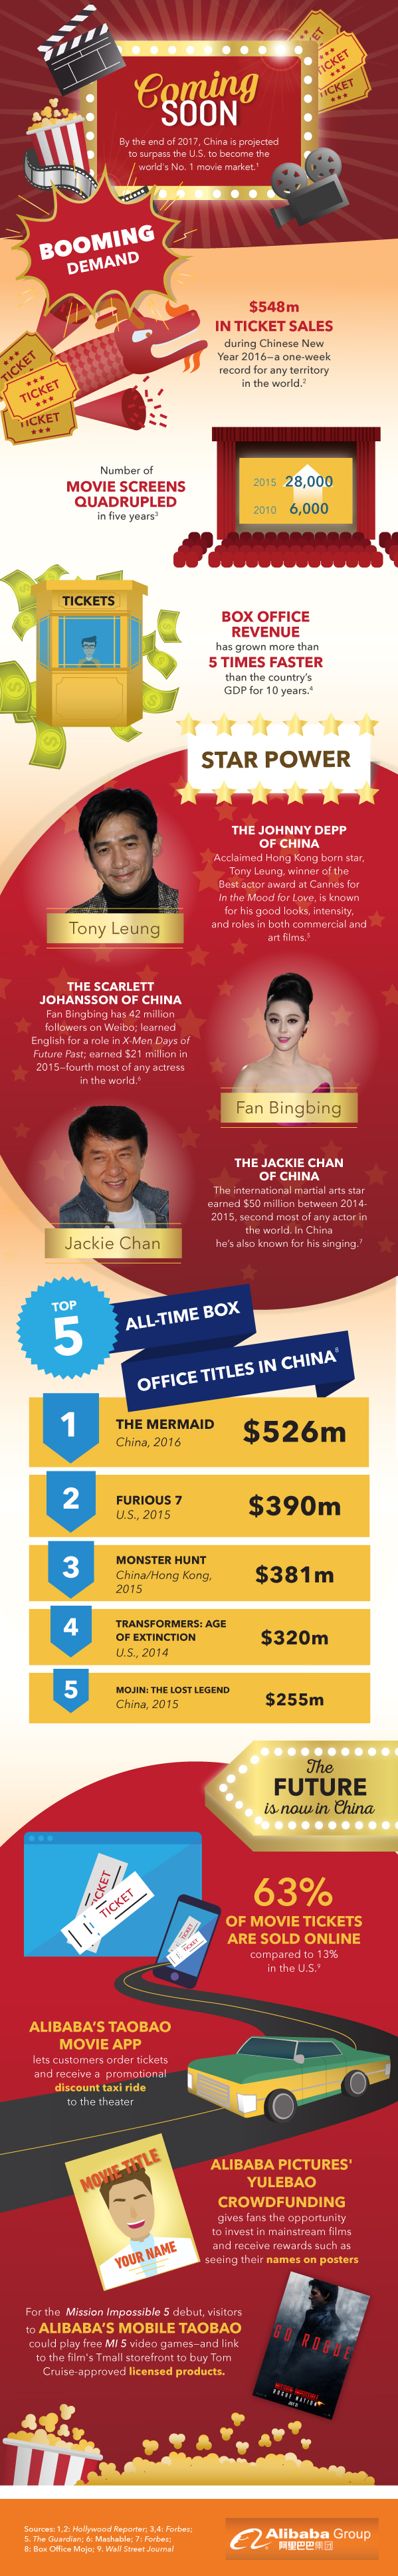 hollywood italy movie deals with alibaba Movie_Infographic_041816